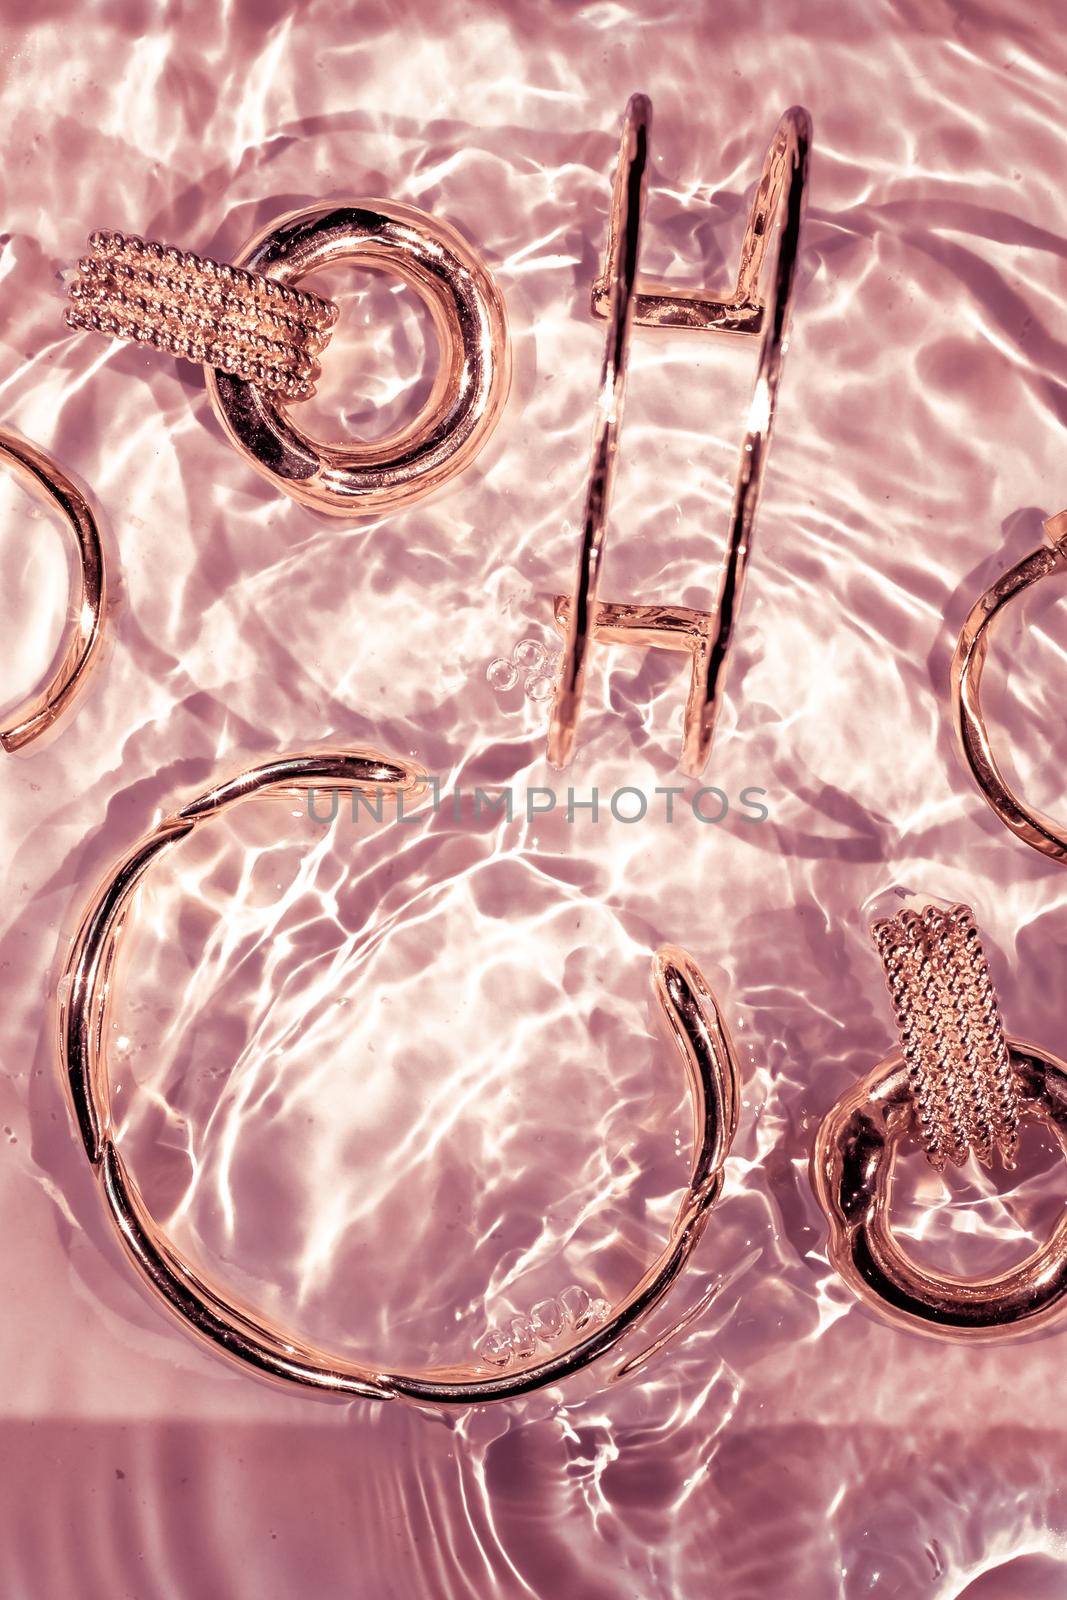 Jewellery branding, fashion gift and luxe shopping concept - Rose gold bracelets, earrings, rings, jewelery on pink water background, luxury glamour and holiday beauty design for jewelry brand ads